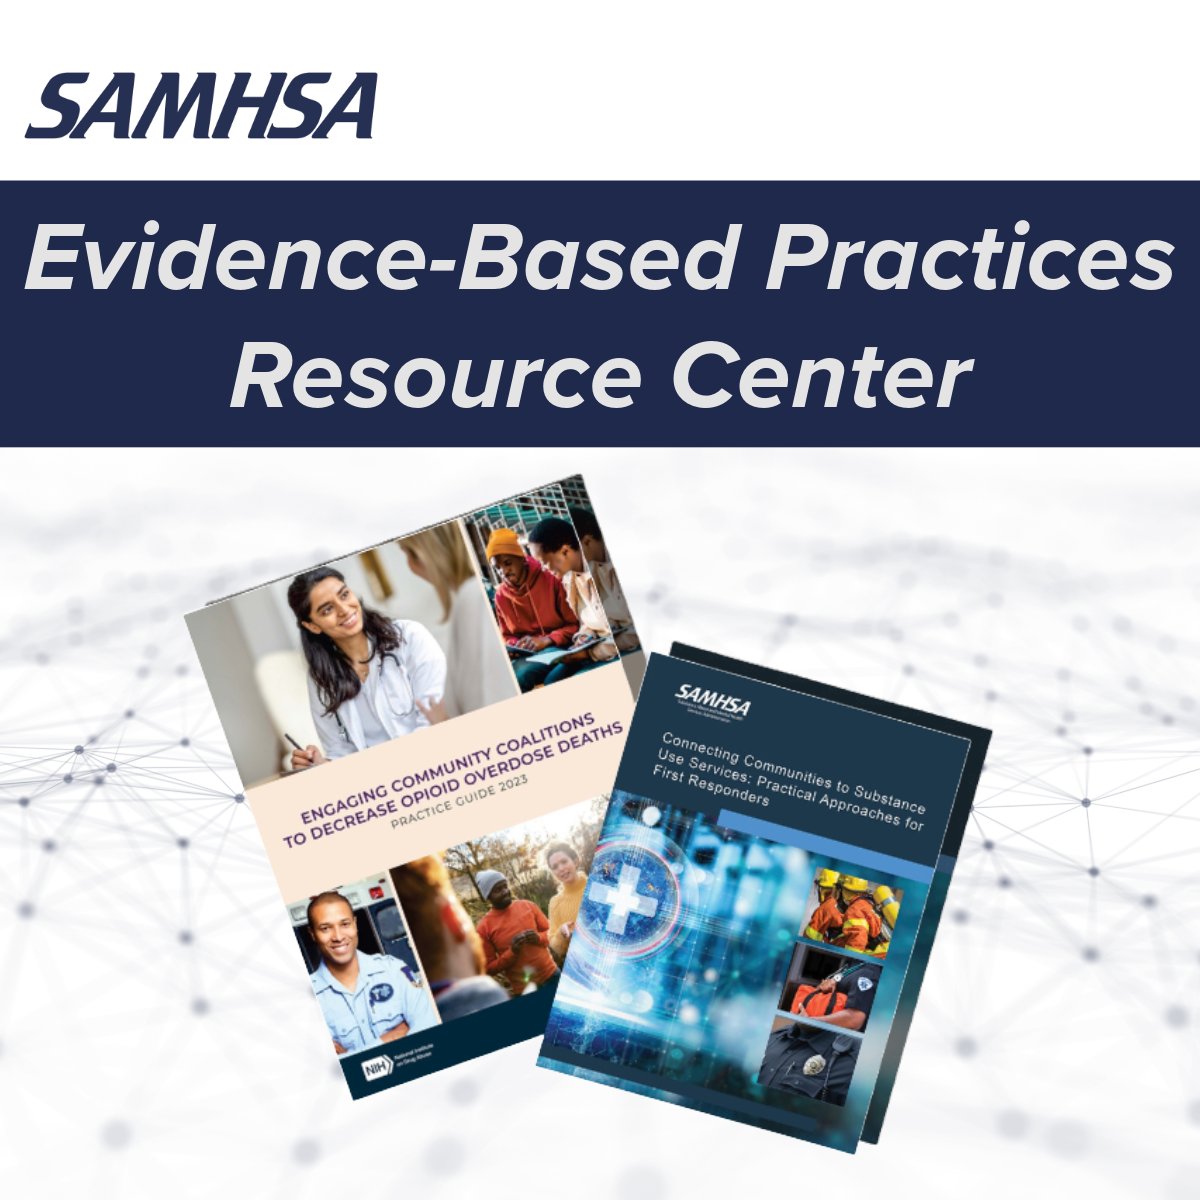 SAMHSA's Evidence-Based Practice Resource Center is part of our comprehensive approach to identifying & disseminating clinically sound & scientifically based policies, practices & programs in a timely manner. Learn more: samhsa.gov/resource-searc…